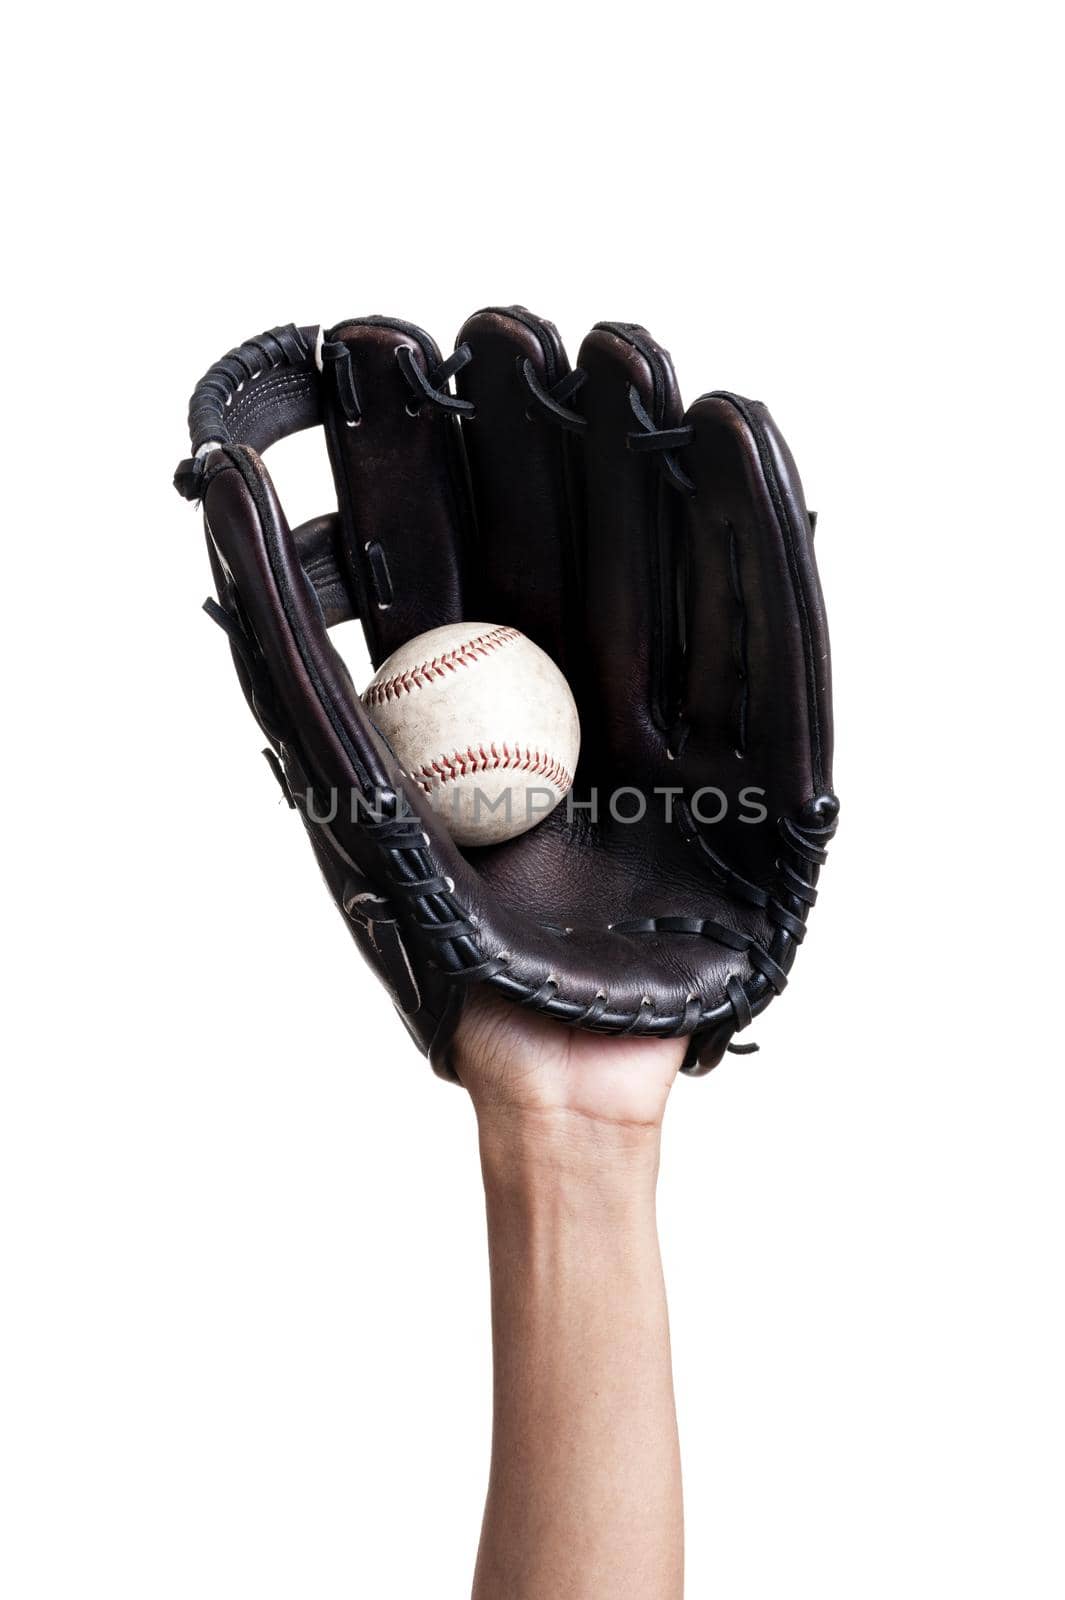 catching baseball with leather baseball glove over white background